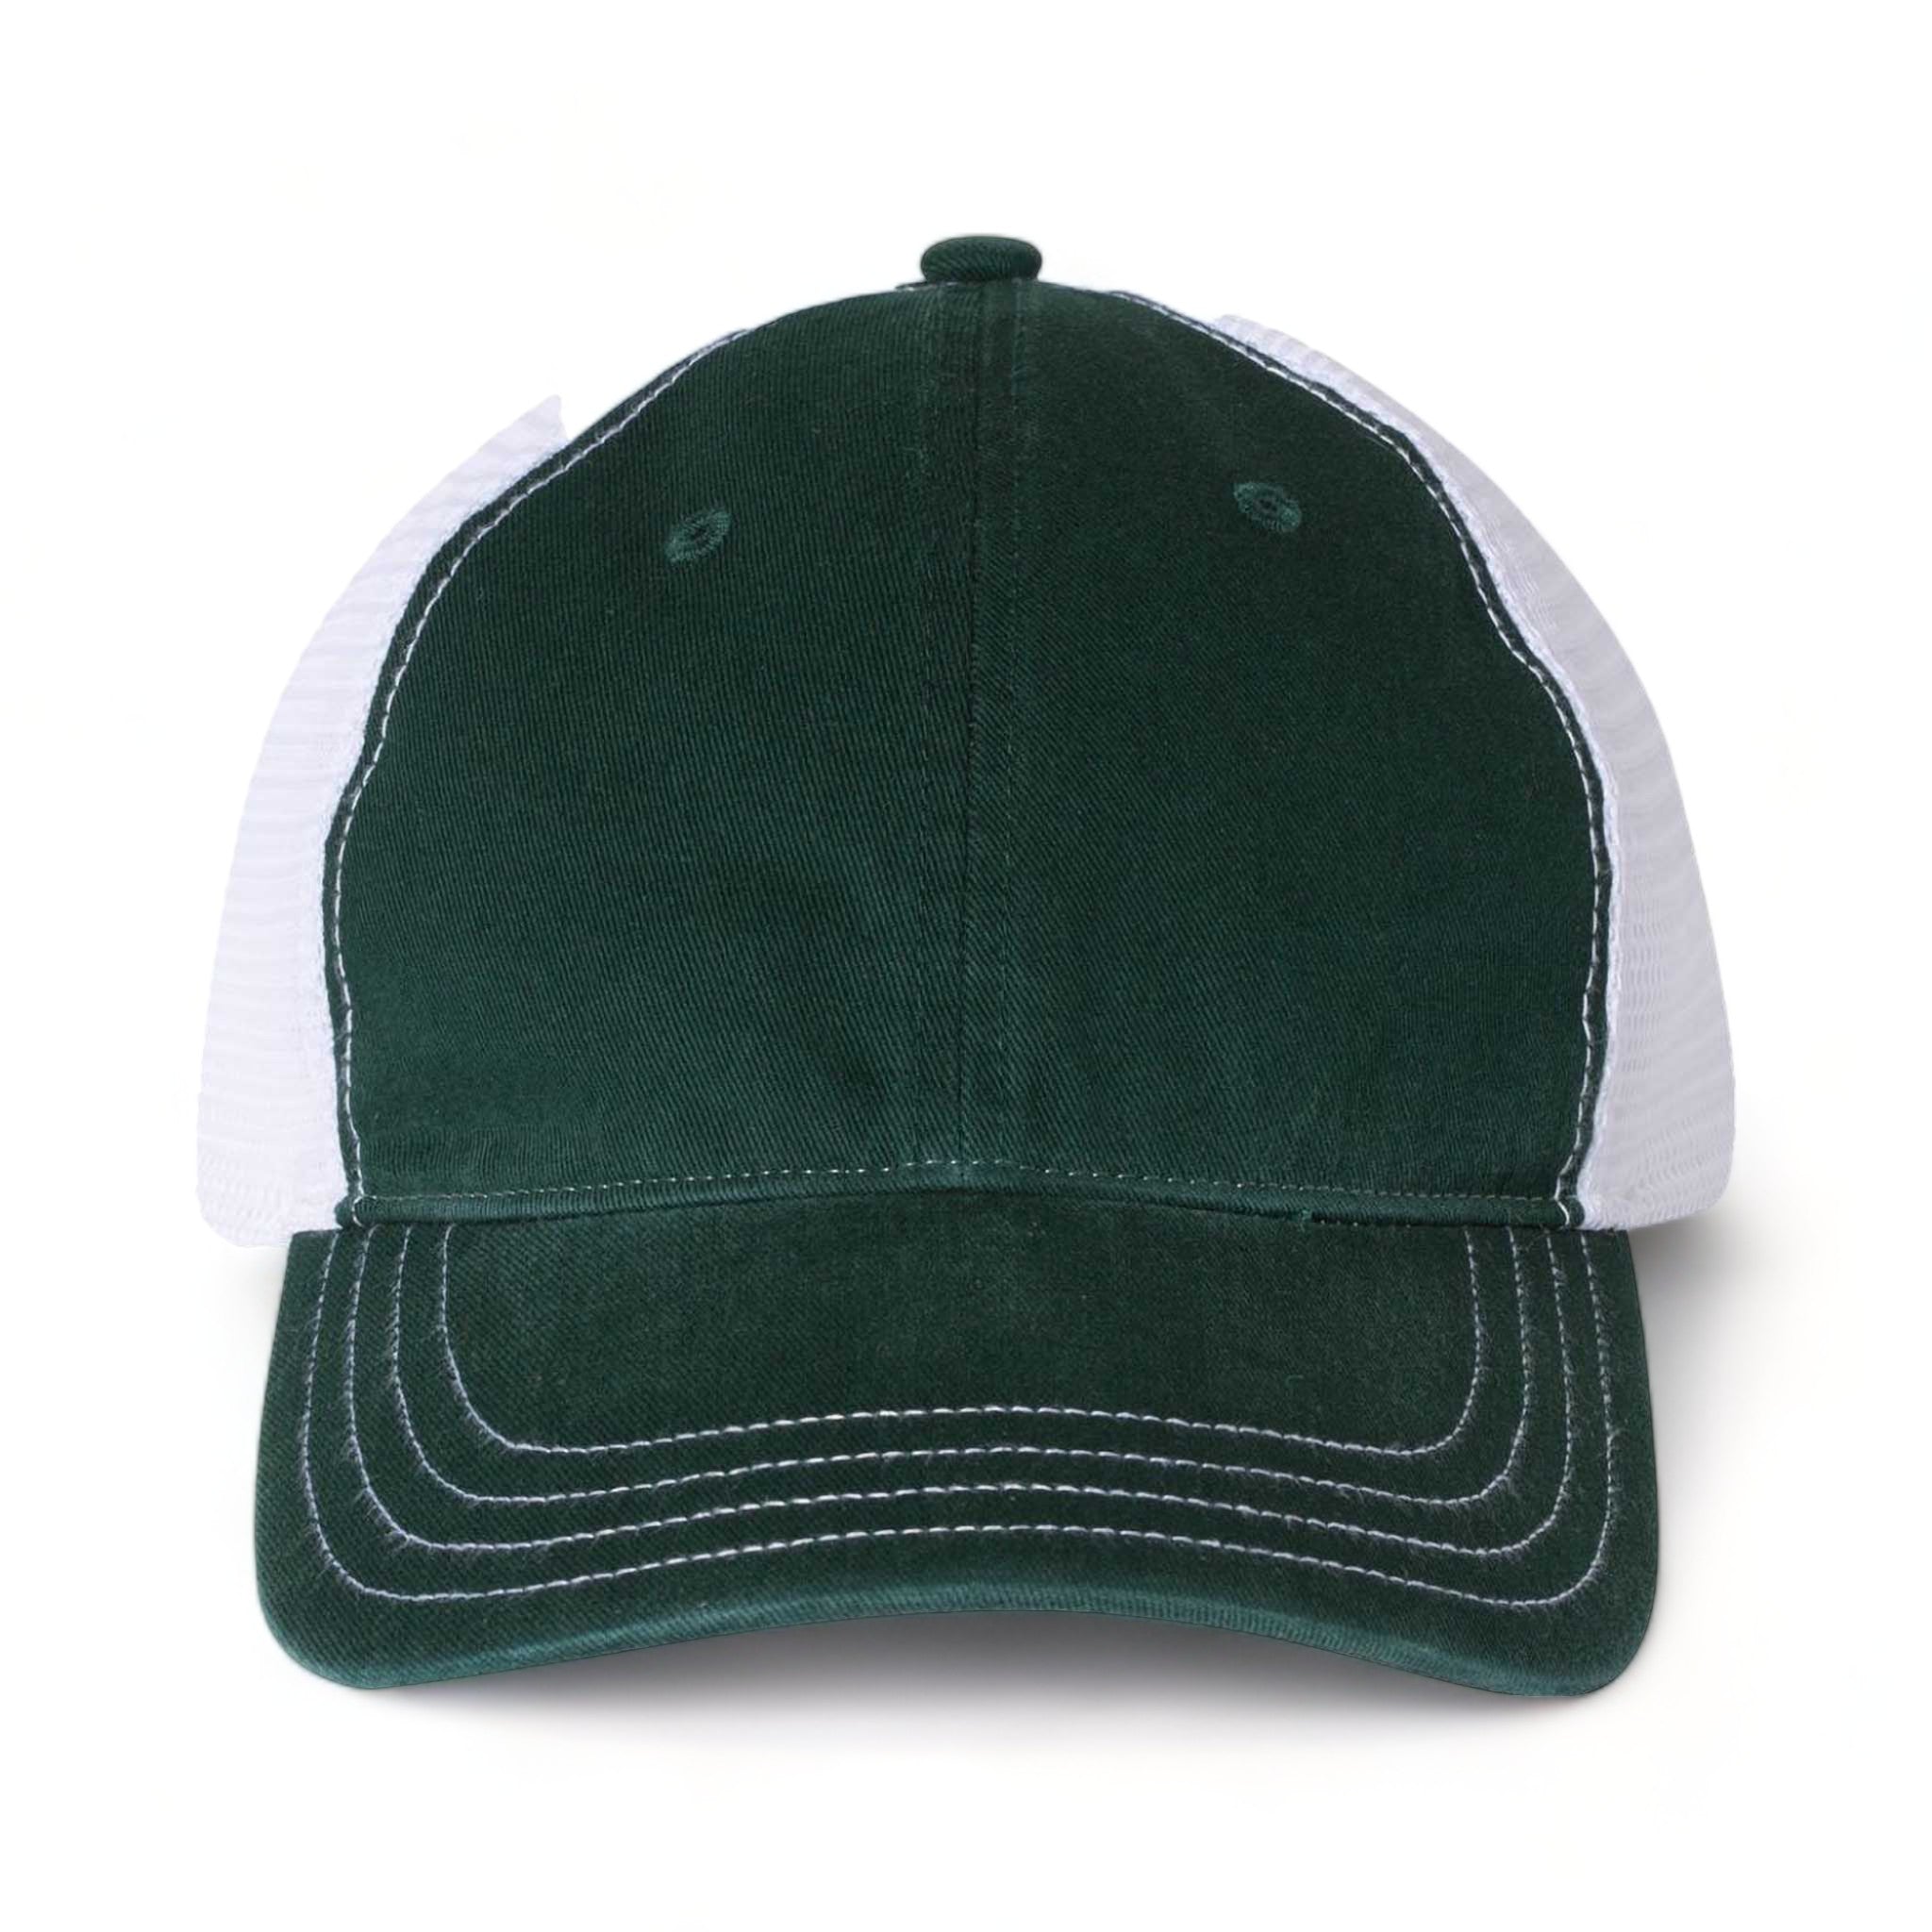 Front view of Richardson 111 custom hat in dark green and white